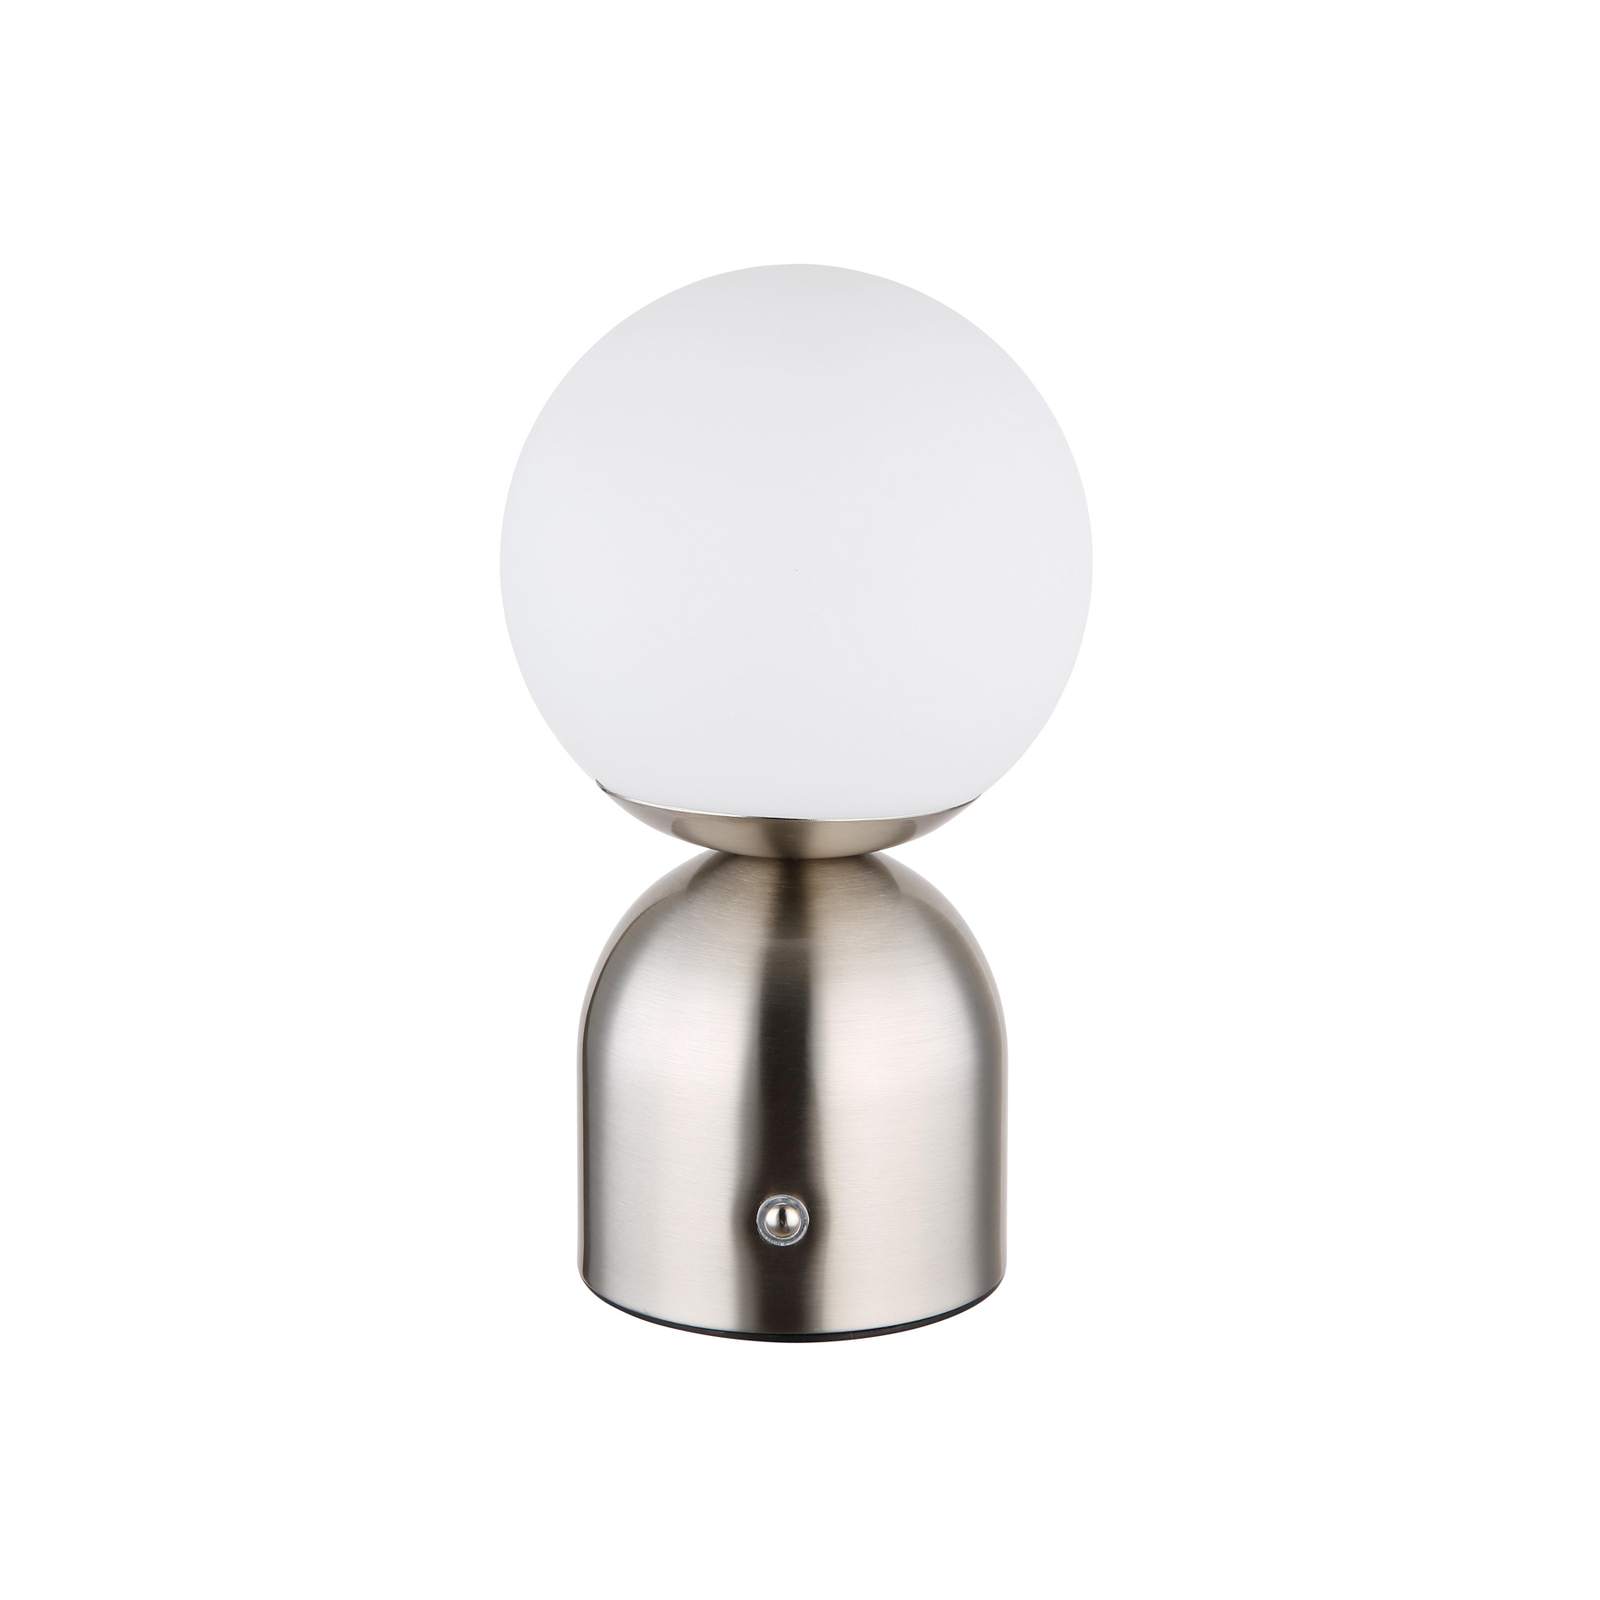 LED table lamp Julsy, nickel-coloured, height 21 cm, CCT